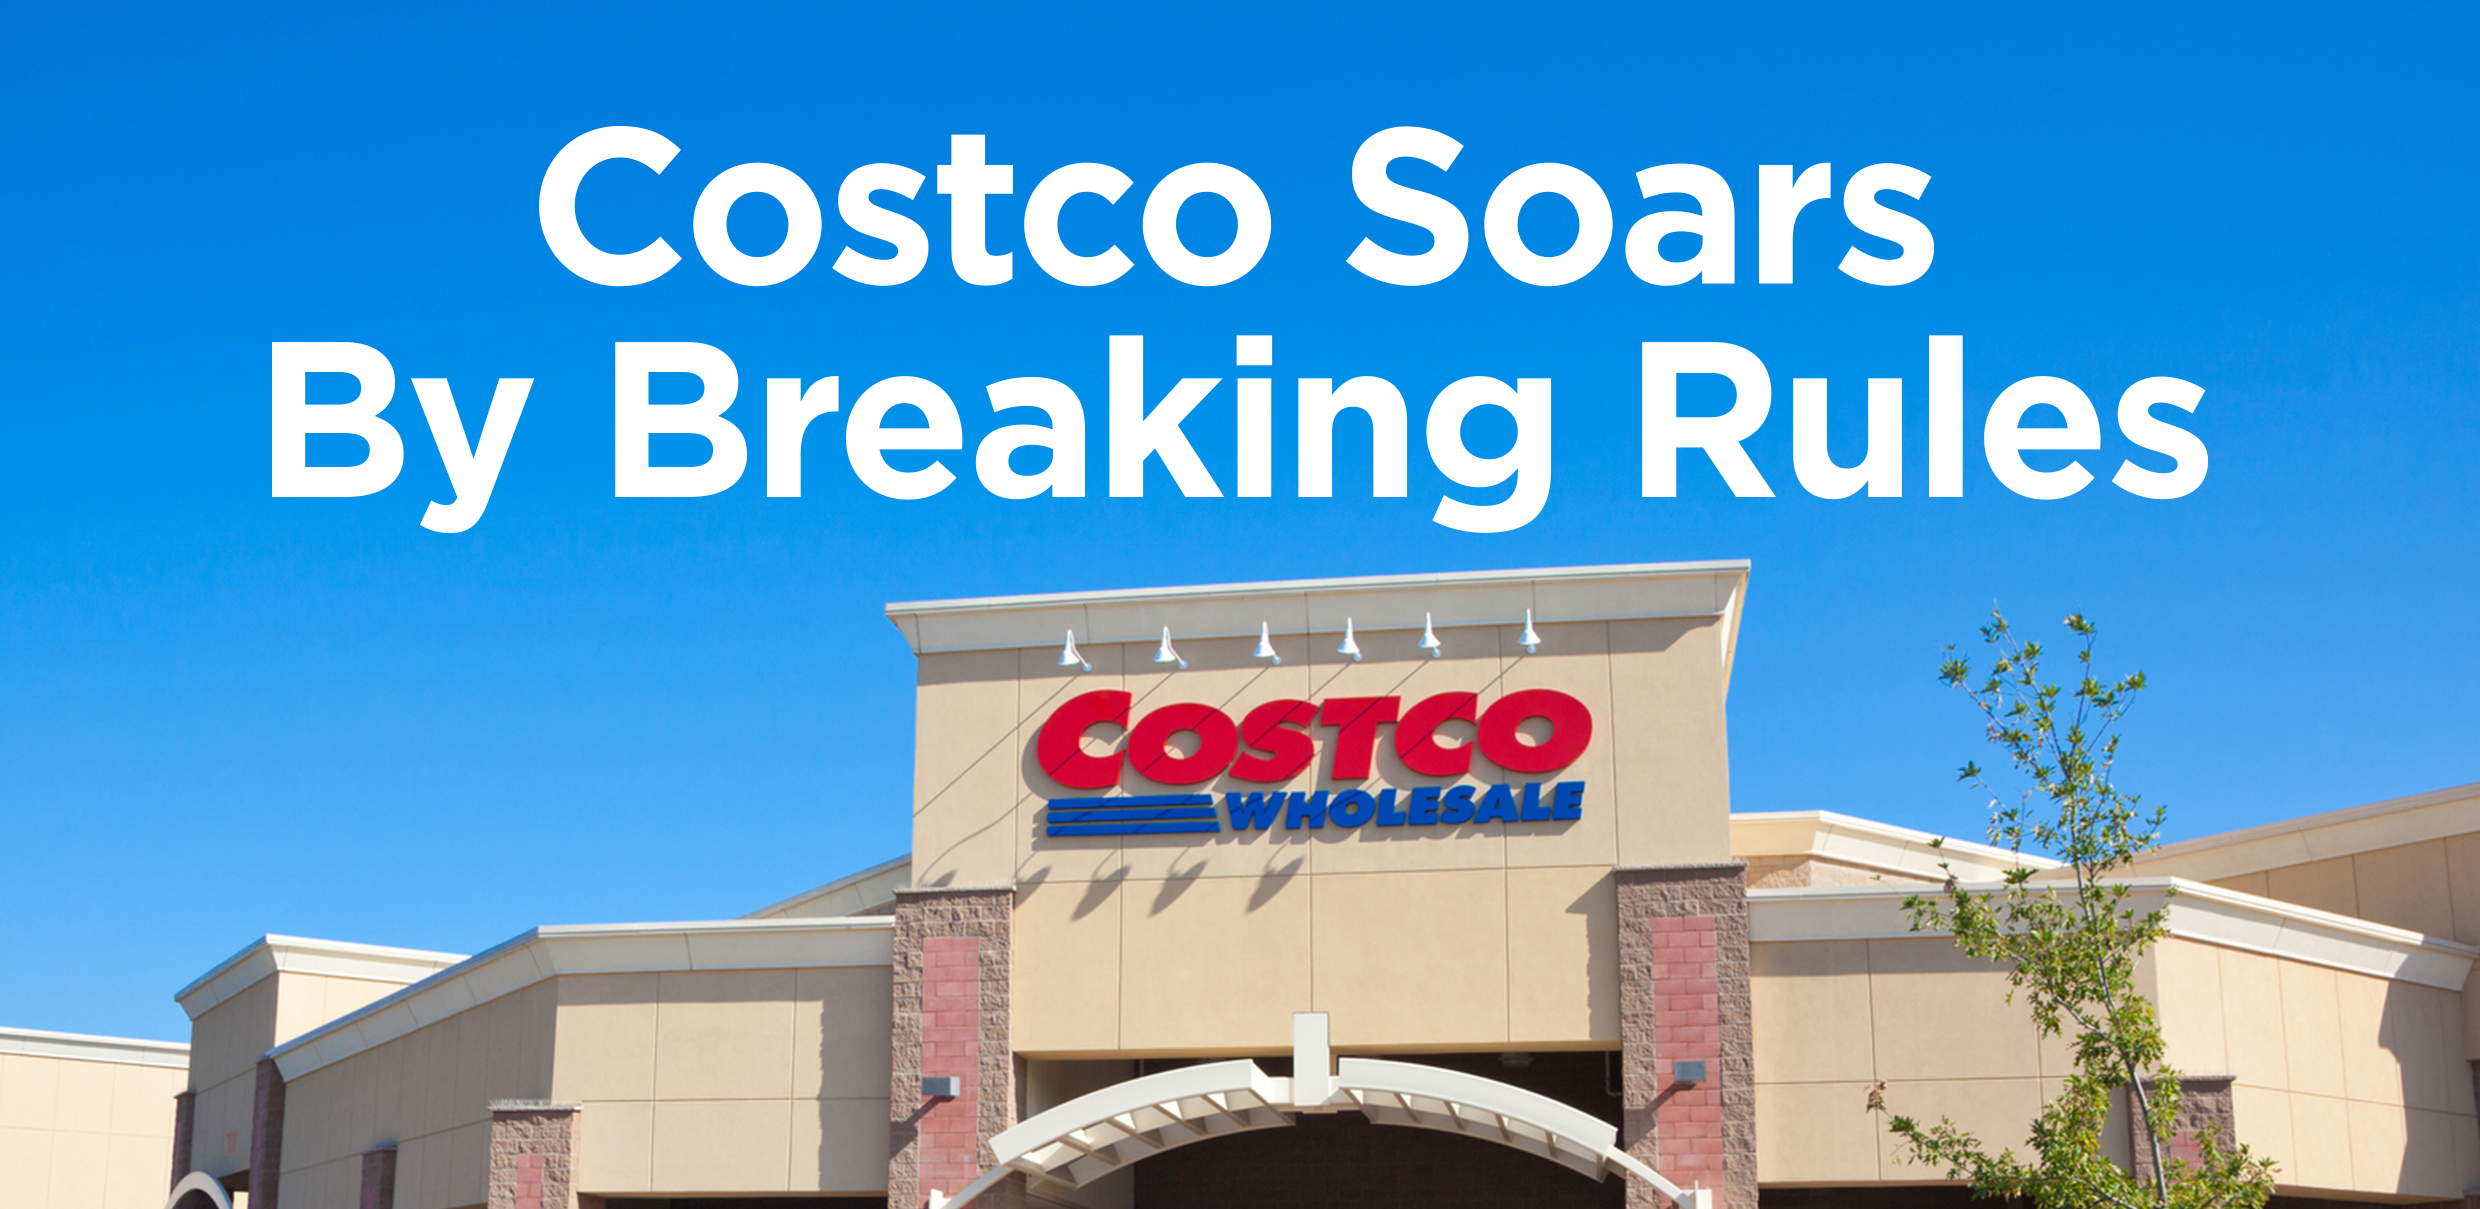 You are currently viewing Costco Soars by Breaking Rules